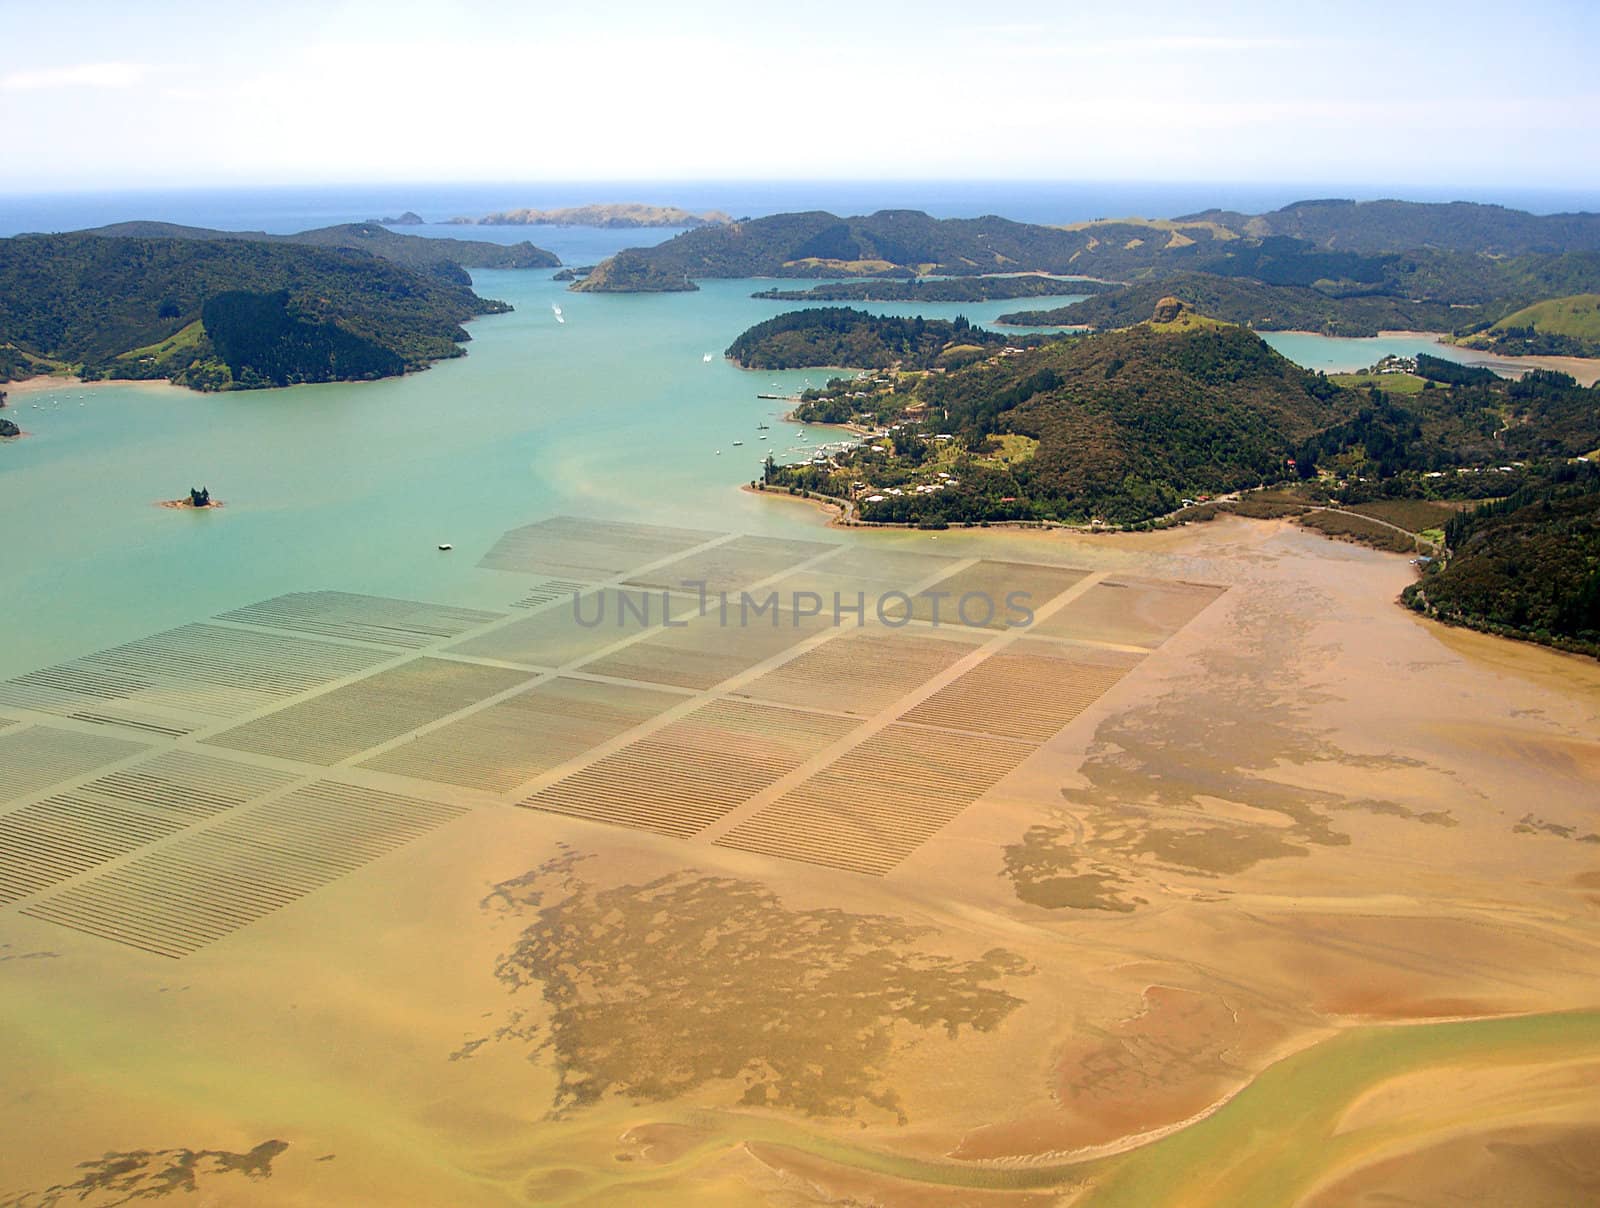 Mussel/Oyster Beds in Whangaroa Harbour, New Zealand. Town of Whangaroa is central and Motu Wai Island is on the left.